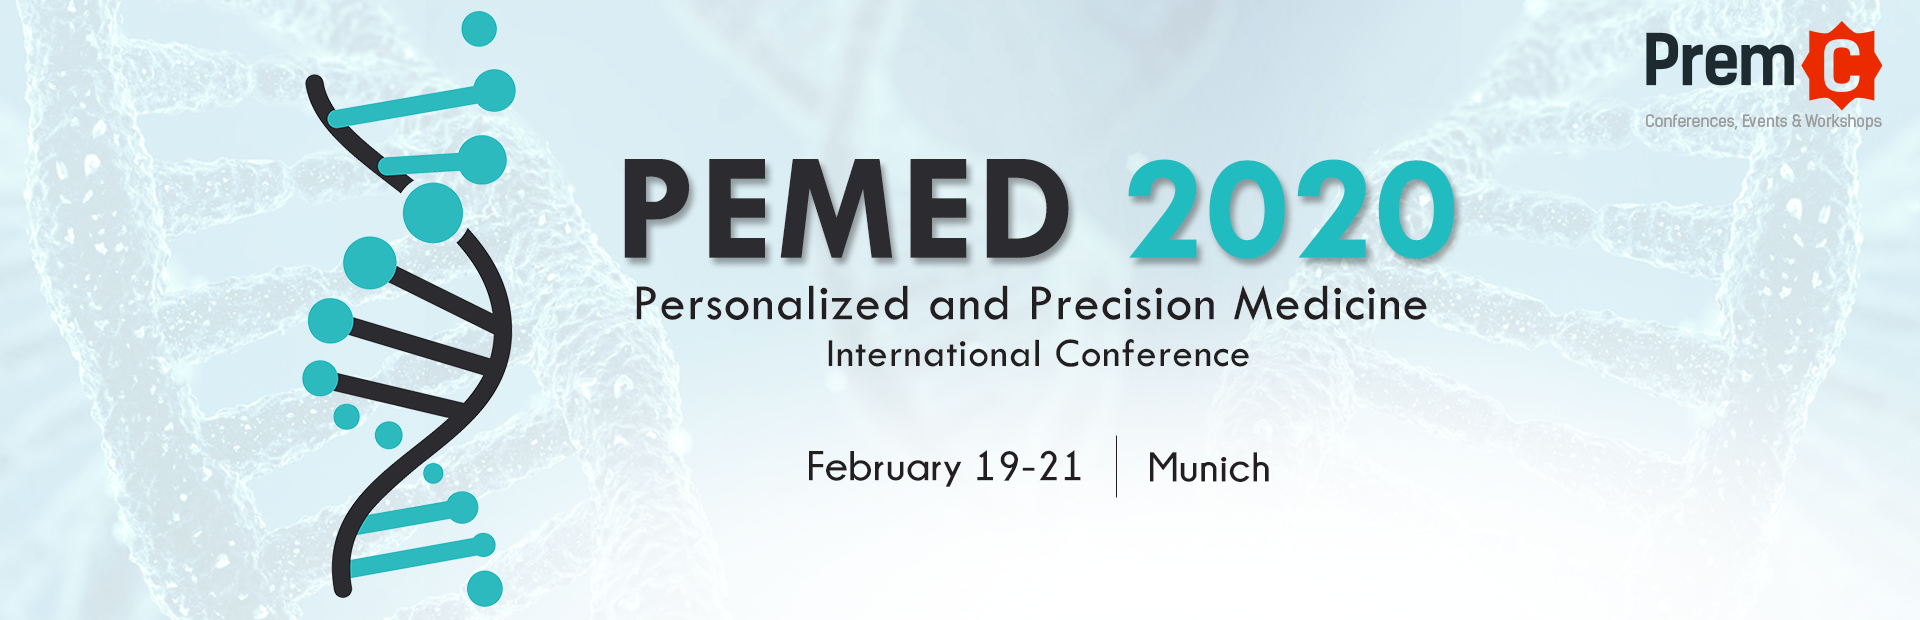  Personalized and Precision Medicine International Conference